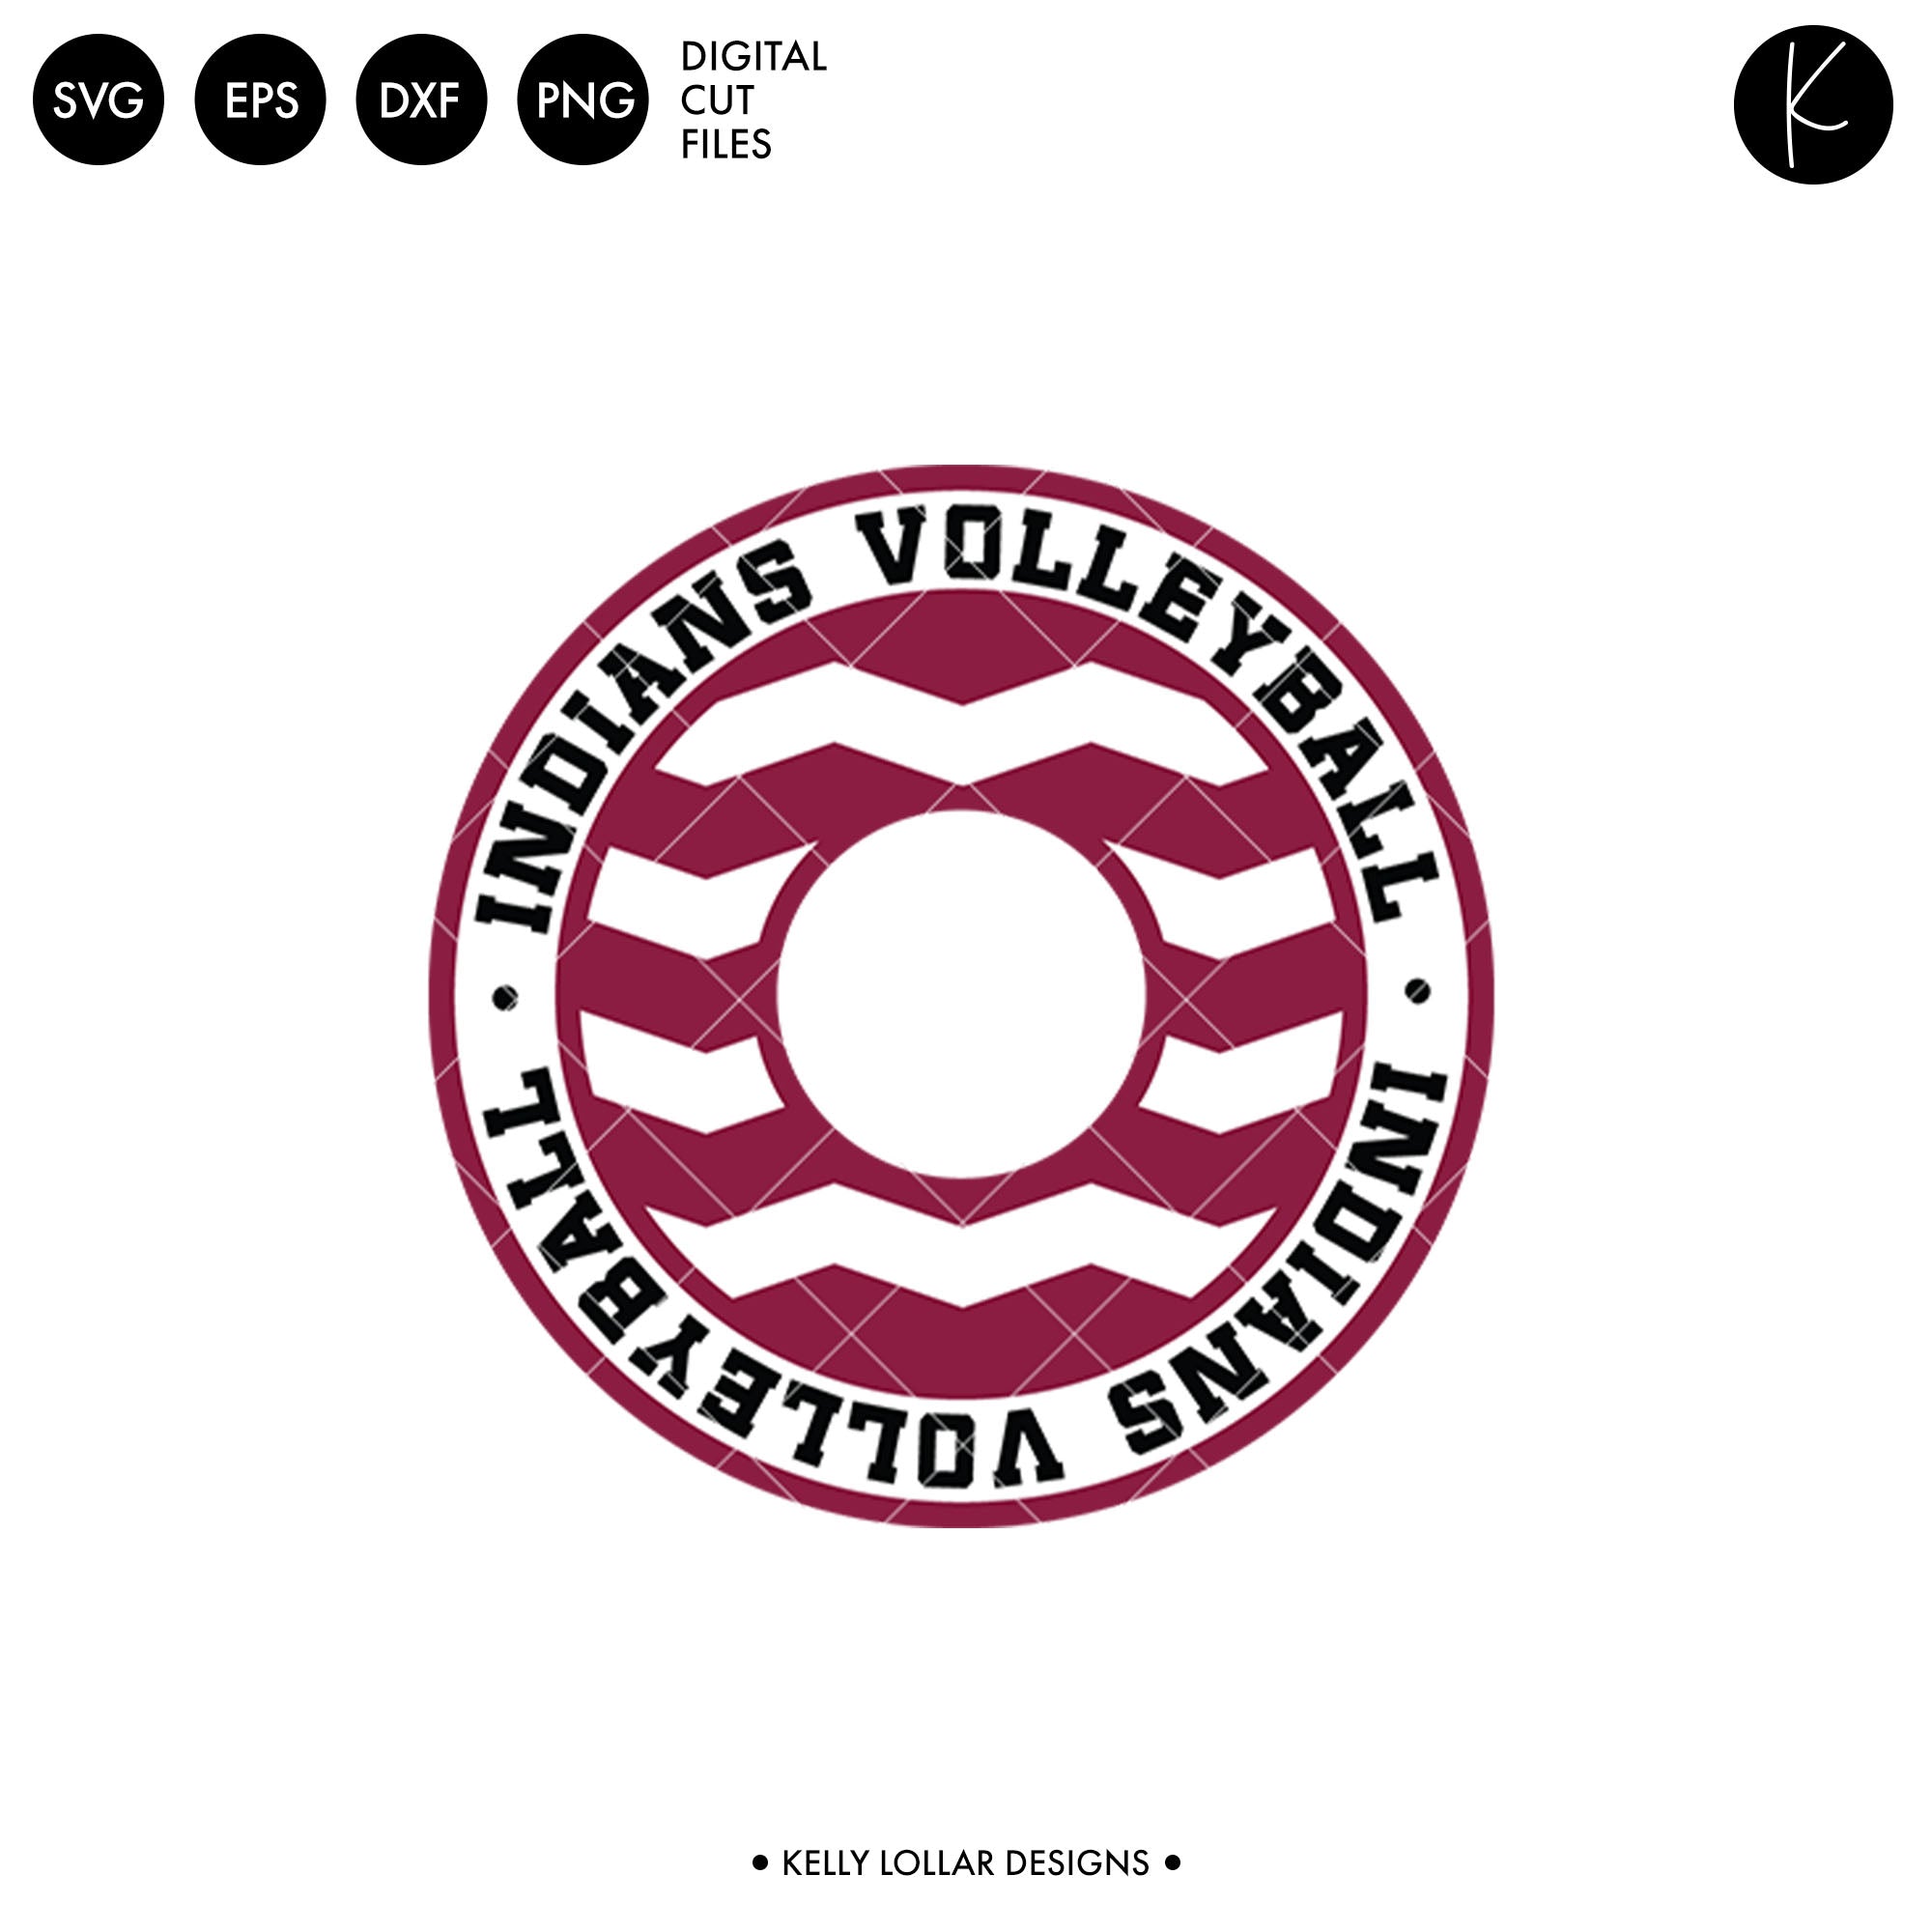 Download Indians Volleyball Bundle Svg Dxf Eps Png Cut Files Kelly Lollar Designs